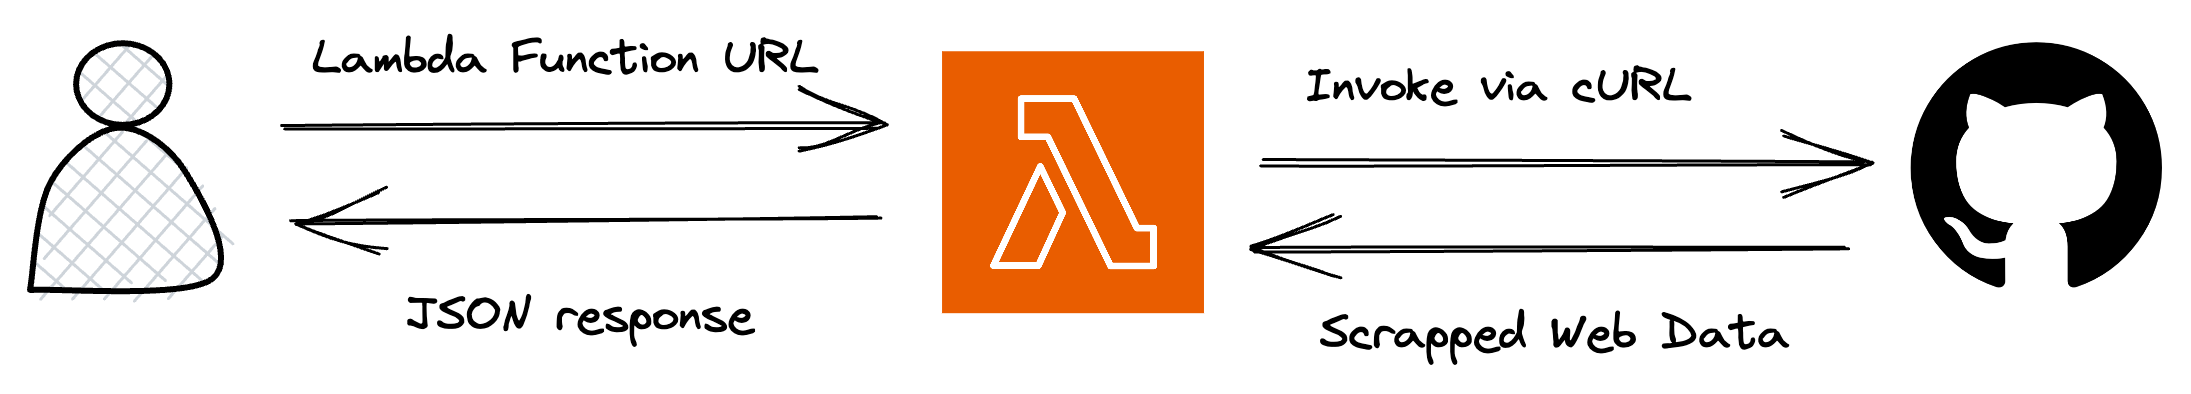 Architecture of Lambda Function URL  Users will invoke a REST API which will trigger a Lambda function and return the scrapped web data from GitHub as a JSON response